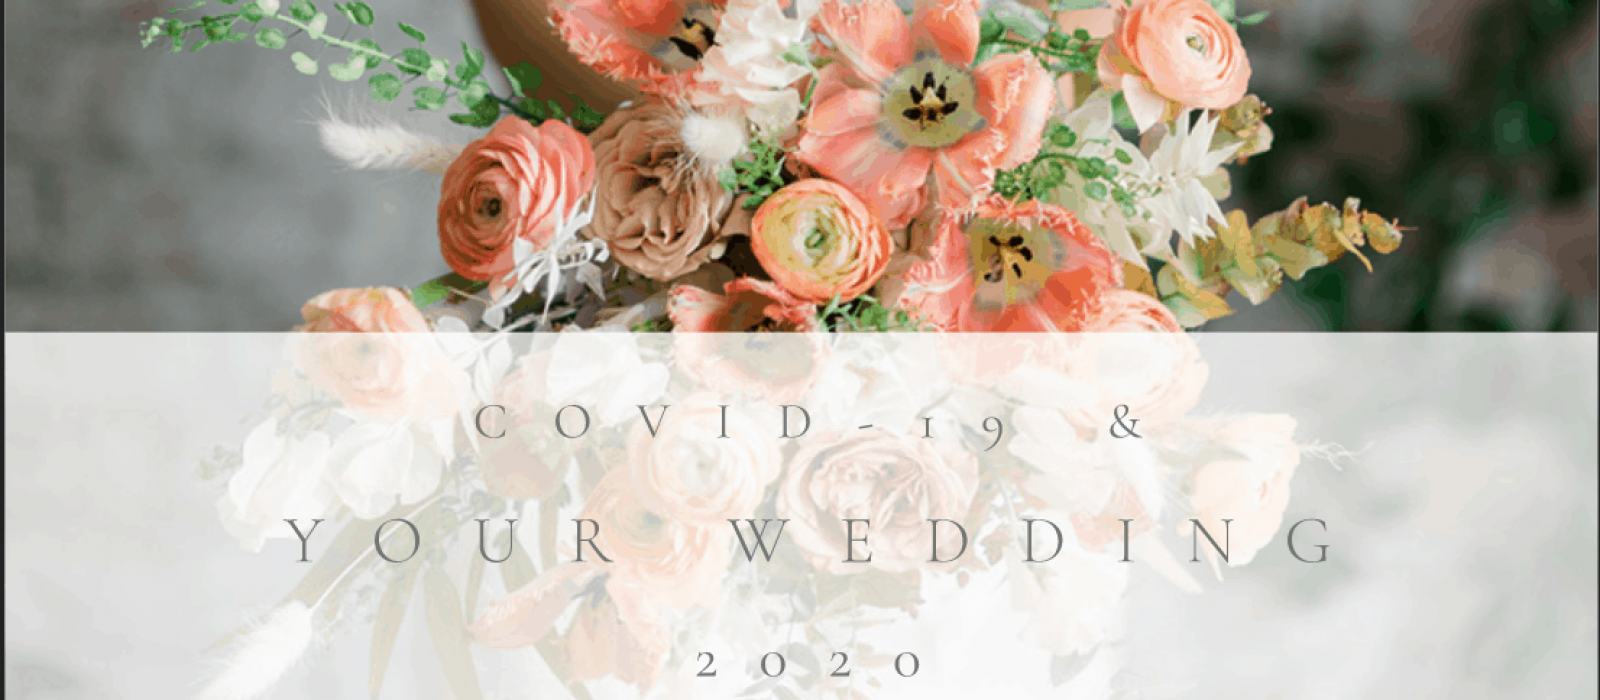 Tips for rescheduling planning your wedding with Covid-19